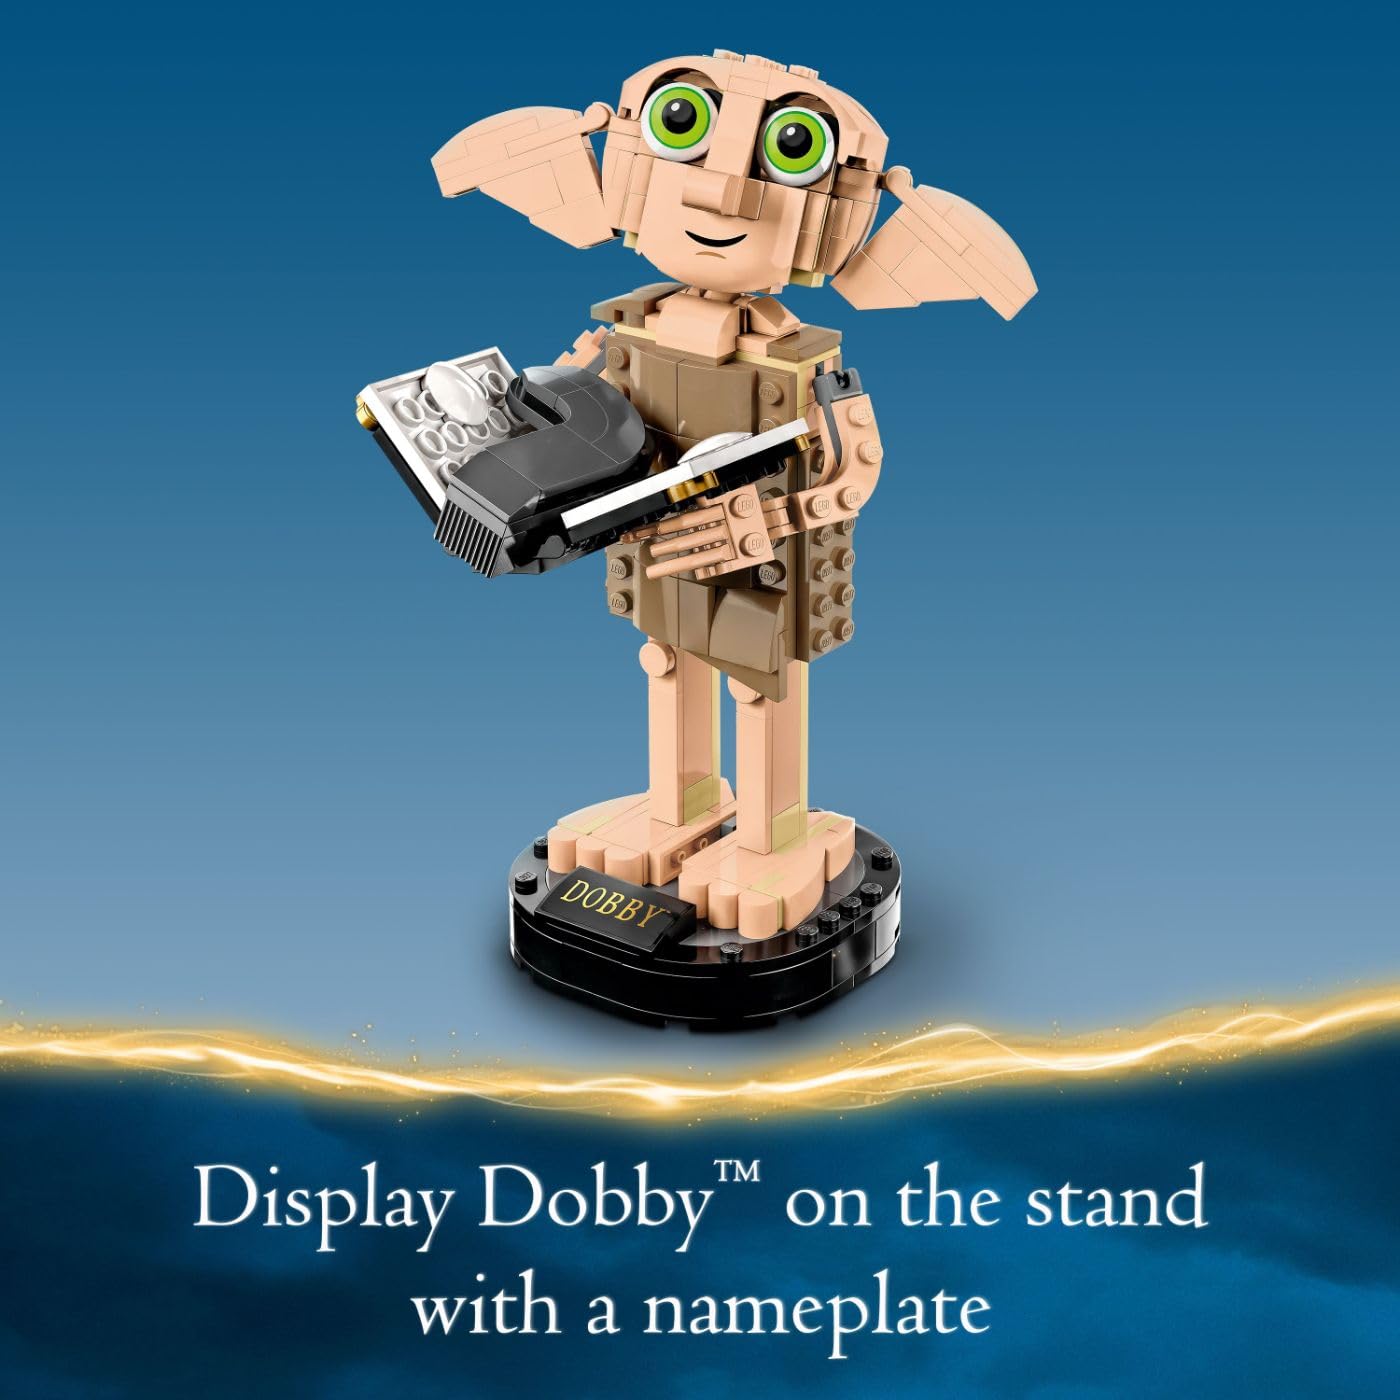 LEGO Harry Potter Dobby The House-Elf 76421 Building Toy Set for 8 Year Old Boys, Girls, and Kids; Authentically Detailed Build and Display Model of a Beloved Character